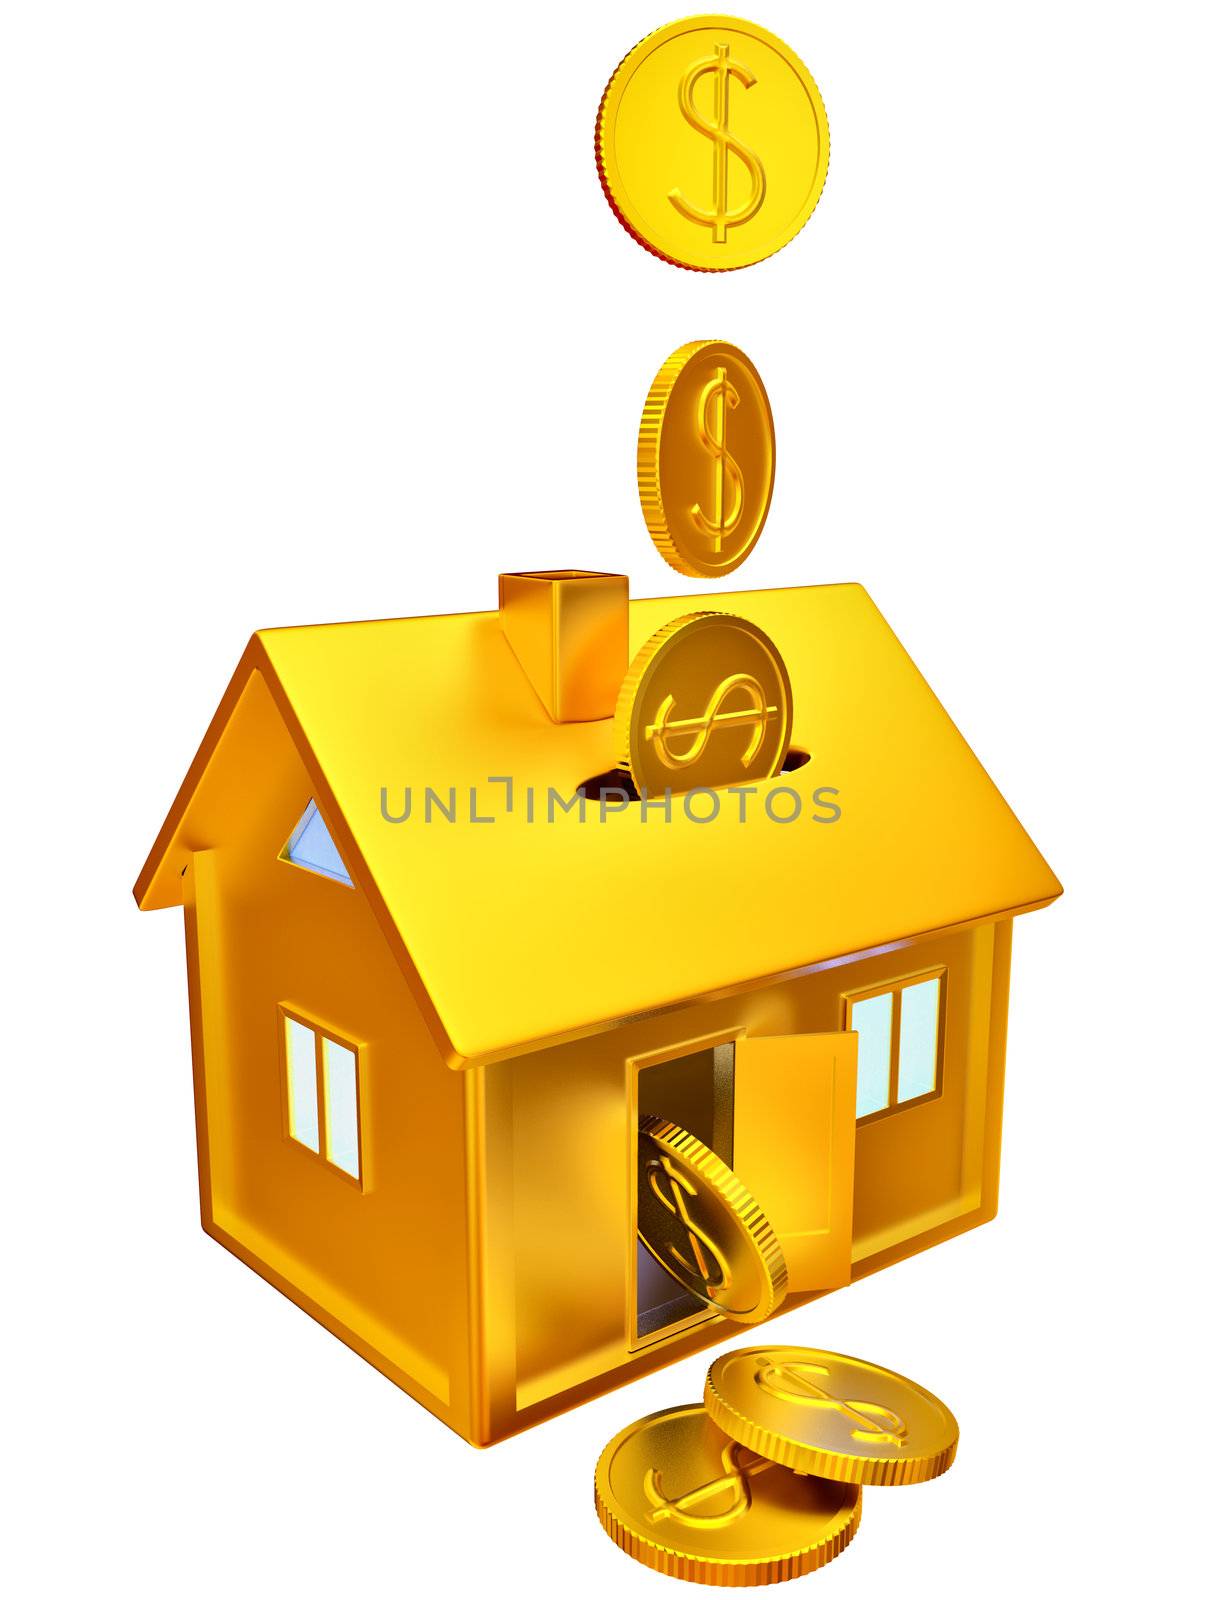 dollar coins falling down into a piggy bank in the form of a gilded house as a symbol of the accumulation